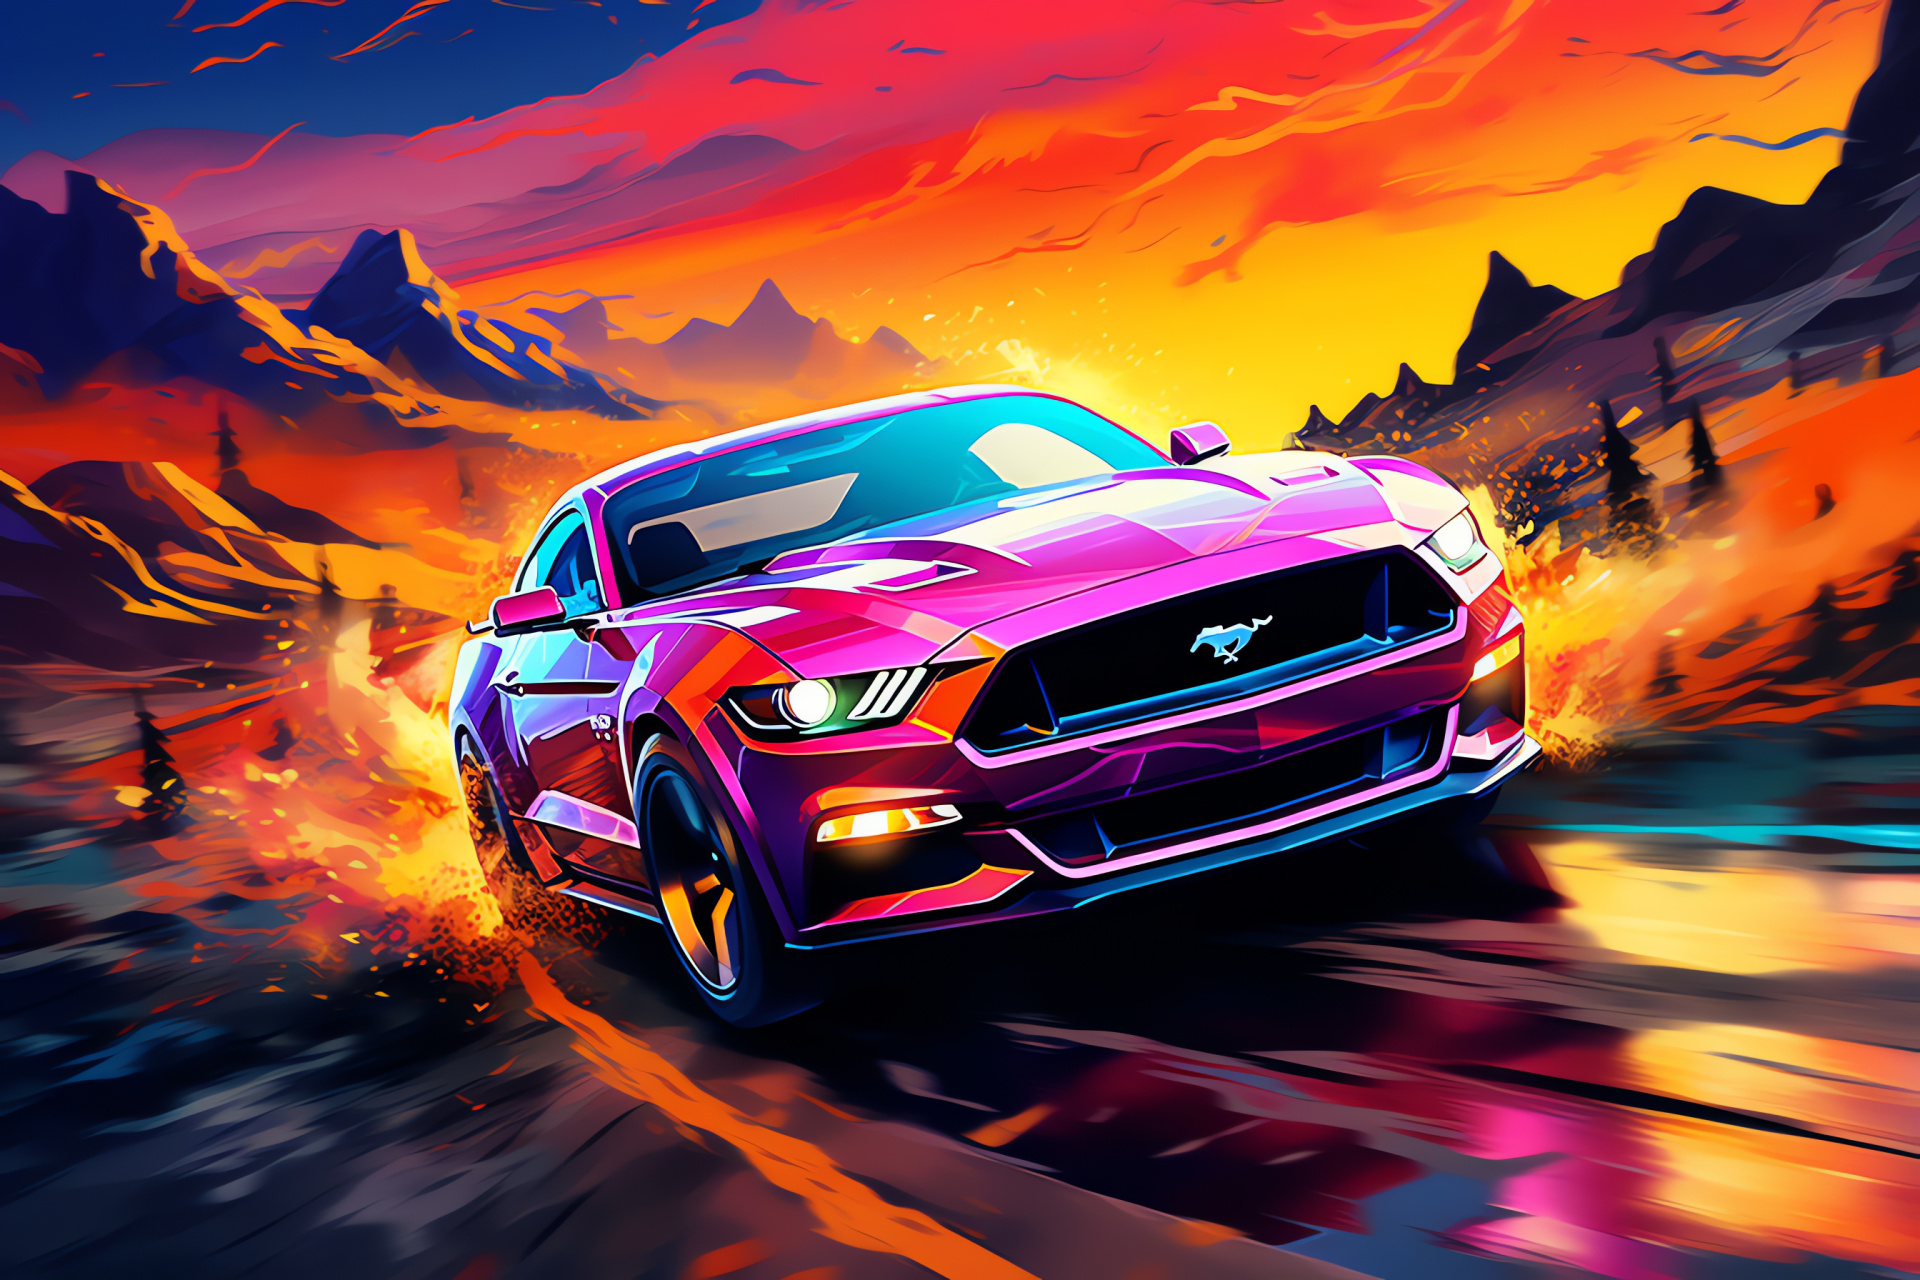 Mustang close-up, Multicolored setting, Spray paint effect, Rich hues, Intense texture, HD Desktop Image